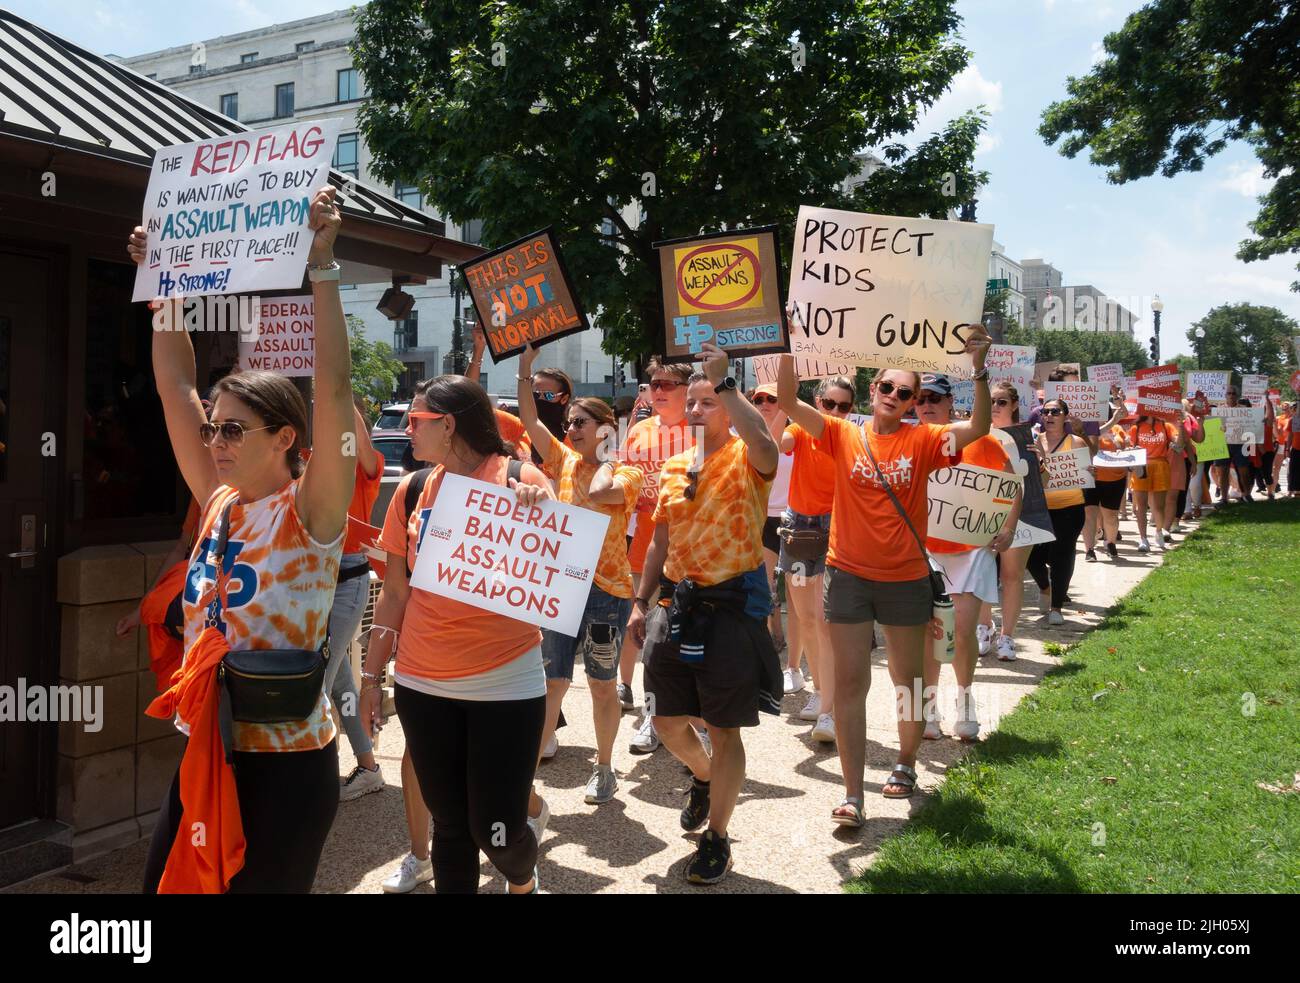 Washington, DC. July 13, 2022: Demanding stricter gun laws, including an assault weapons ban, demonstrators, including families of victims from mass shootings at the 4th of July parade shooting in Highland Park, Illinois, and the Uvalde, Texas school shooting, march from their March Fourth rally near the US capitol. Stock Photo